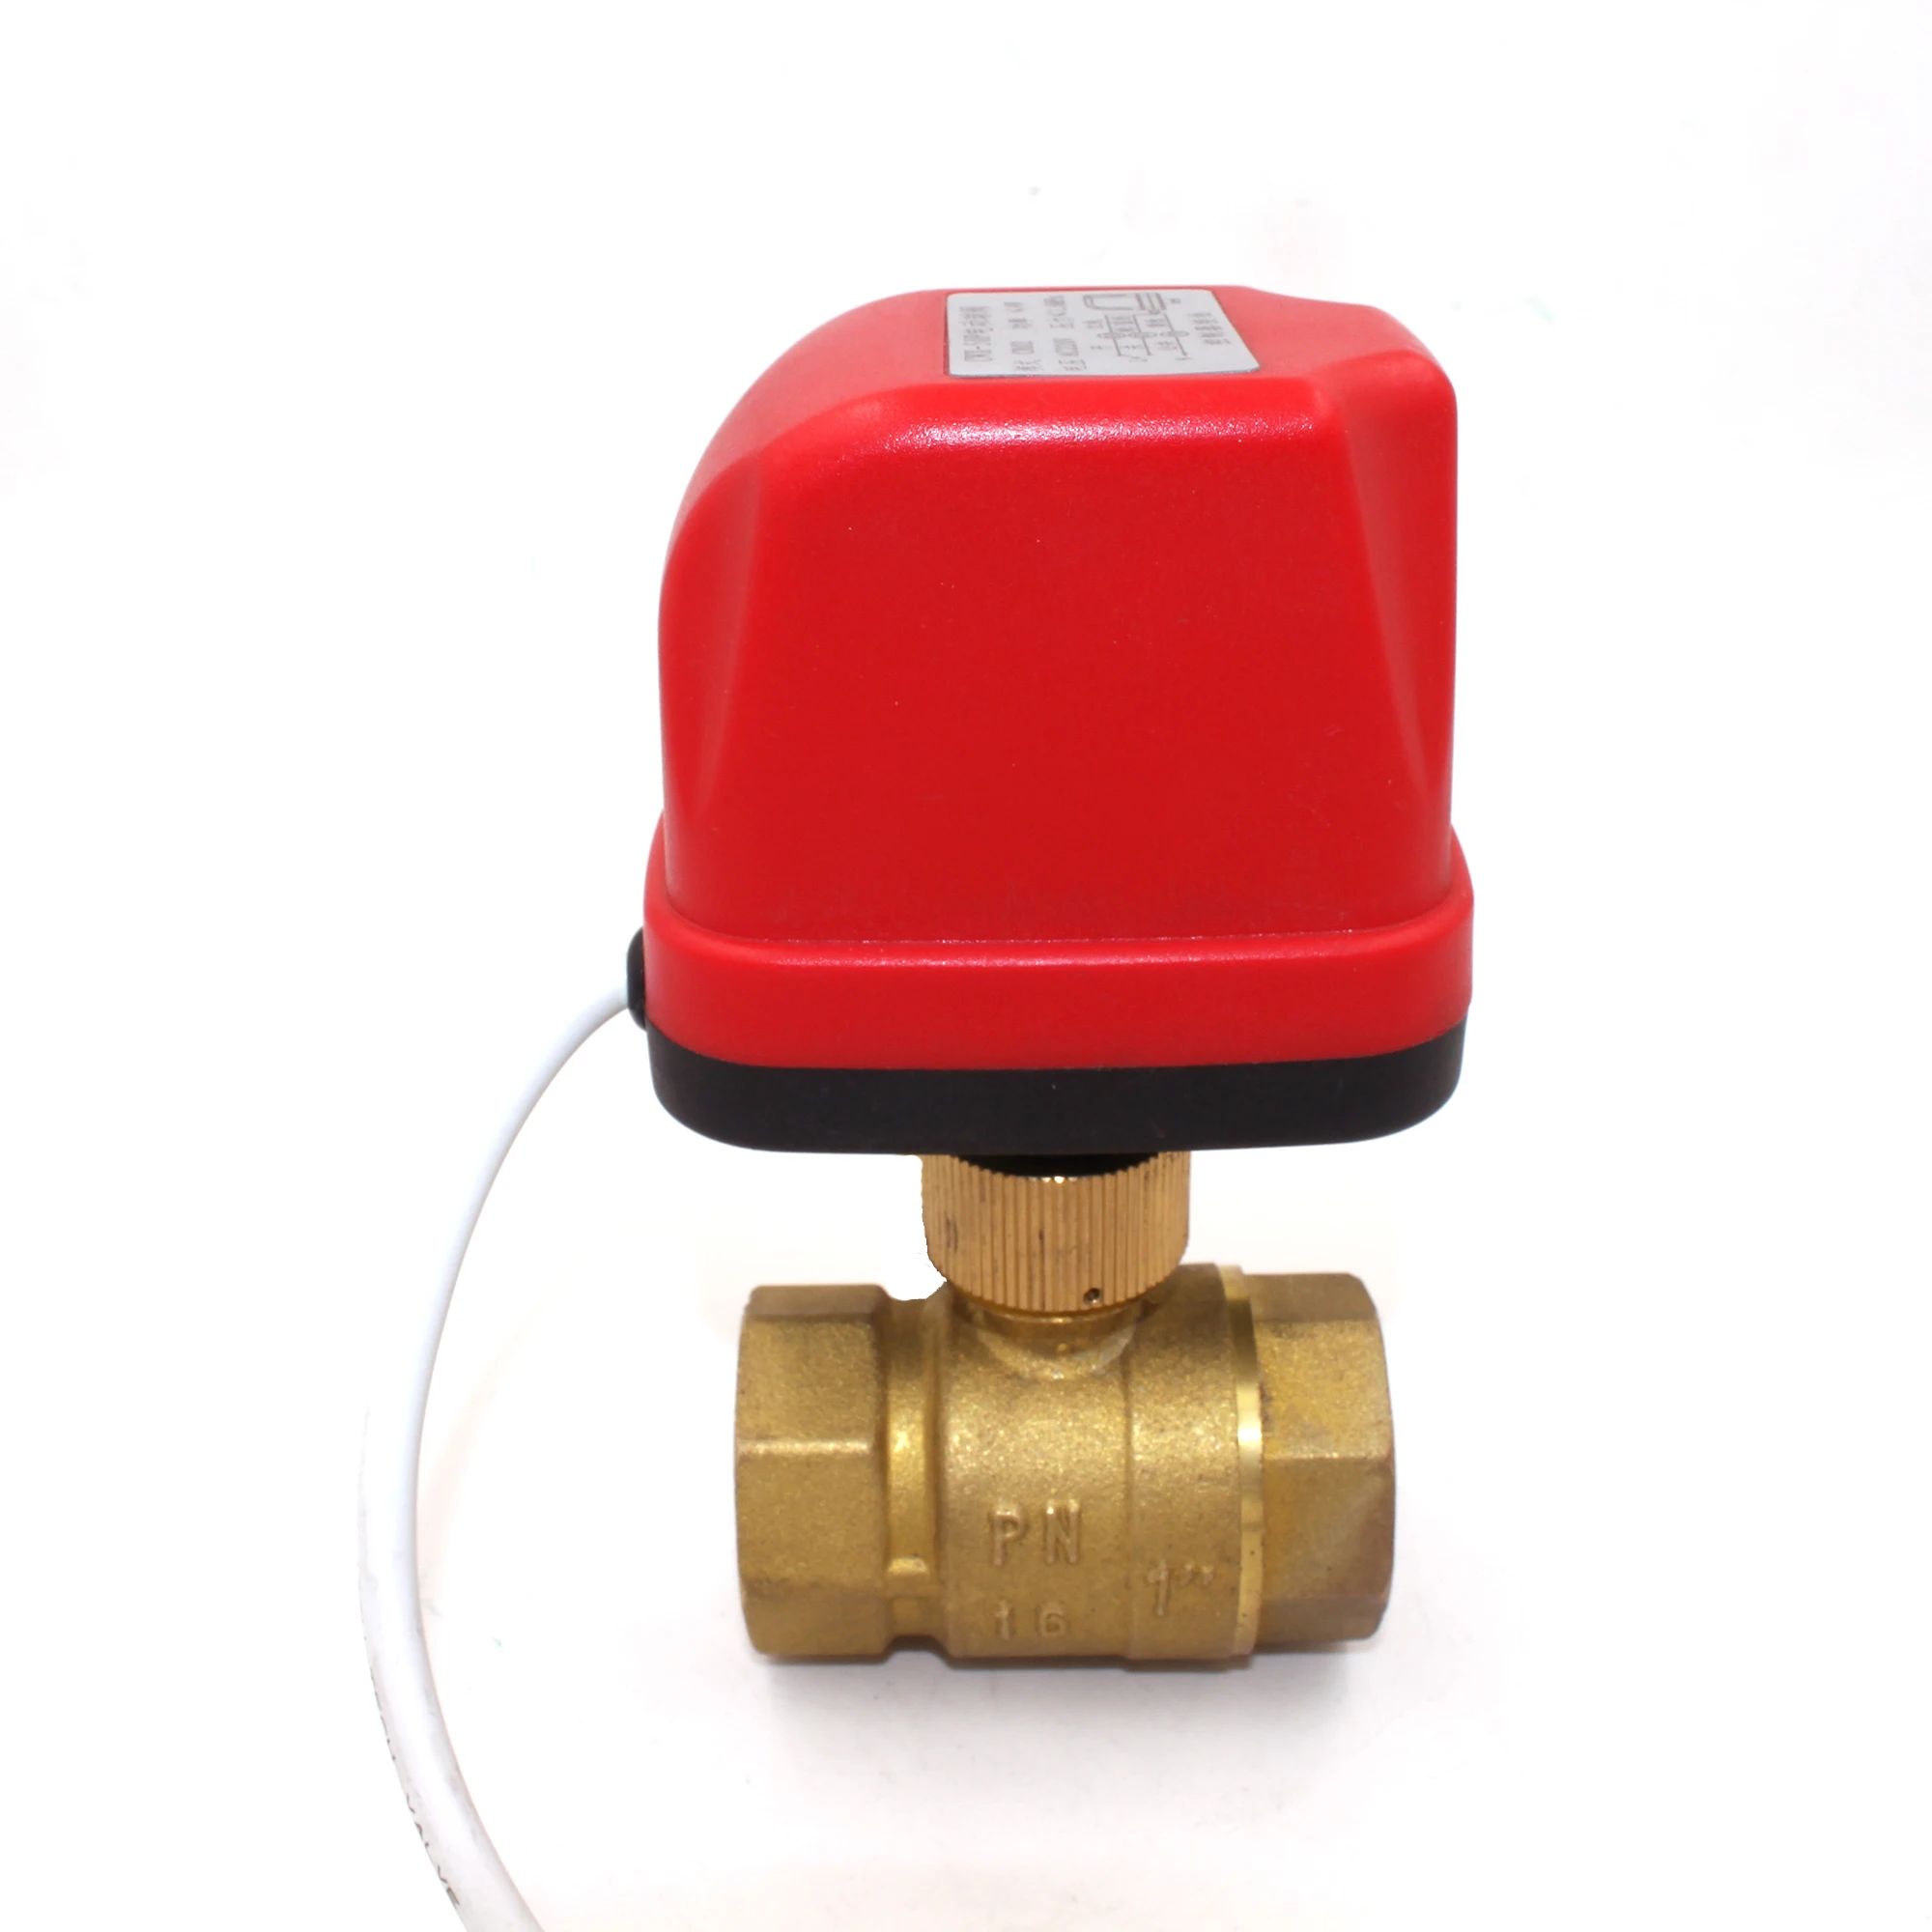 

DN 25 PN 16 water control shutoff electronic motorized brass ball valve 24vac220vac with actuator